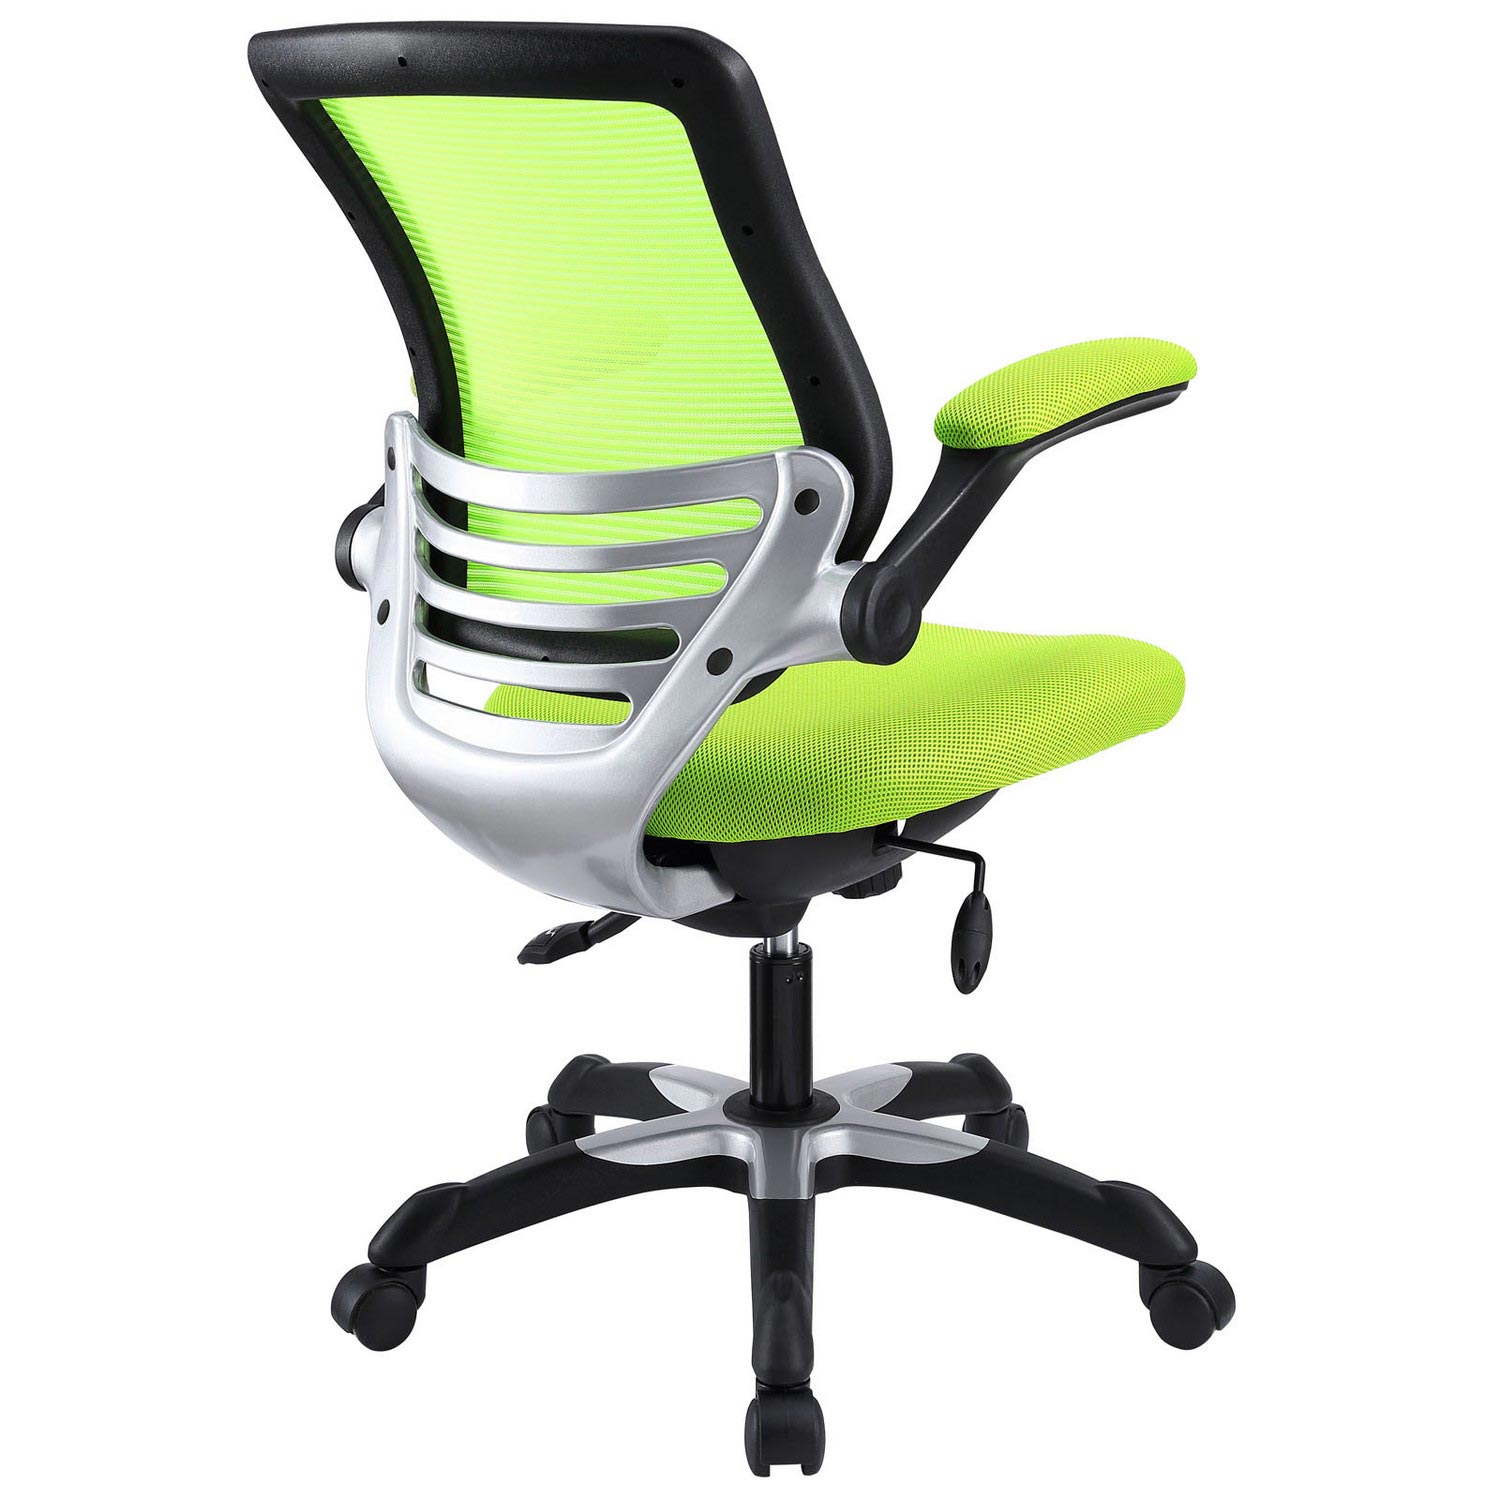 Modway Edge Office Chair - Green